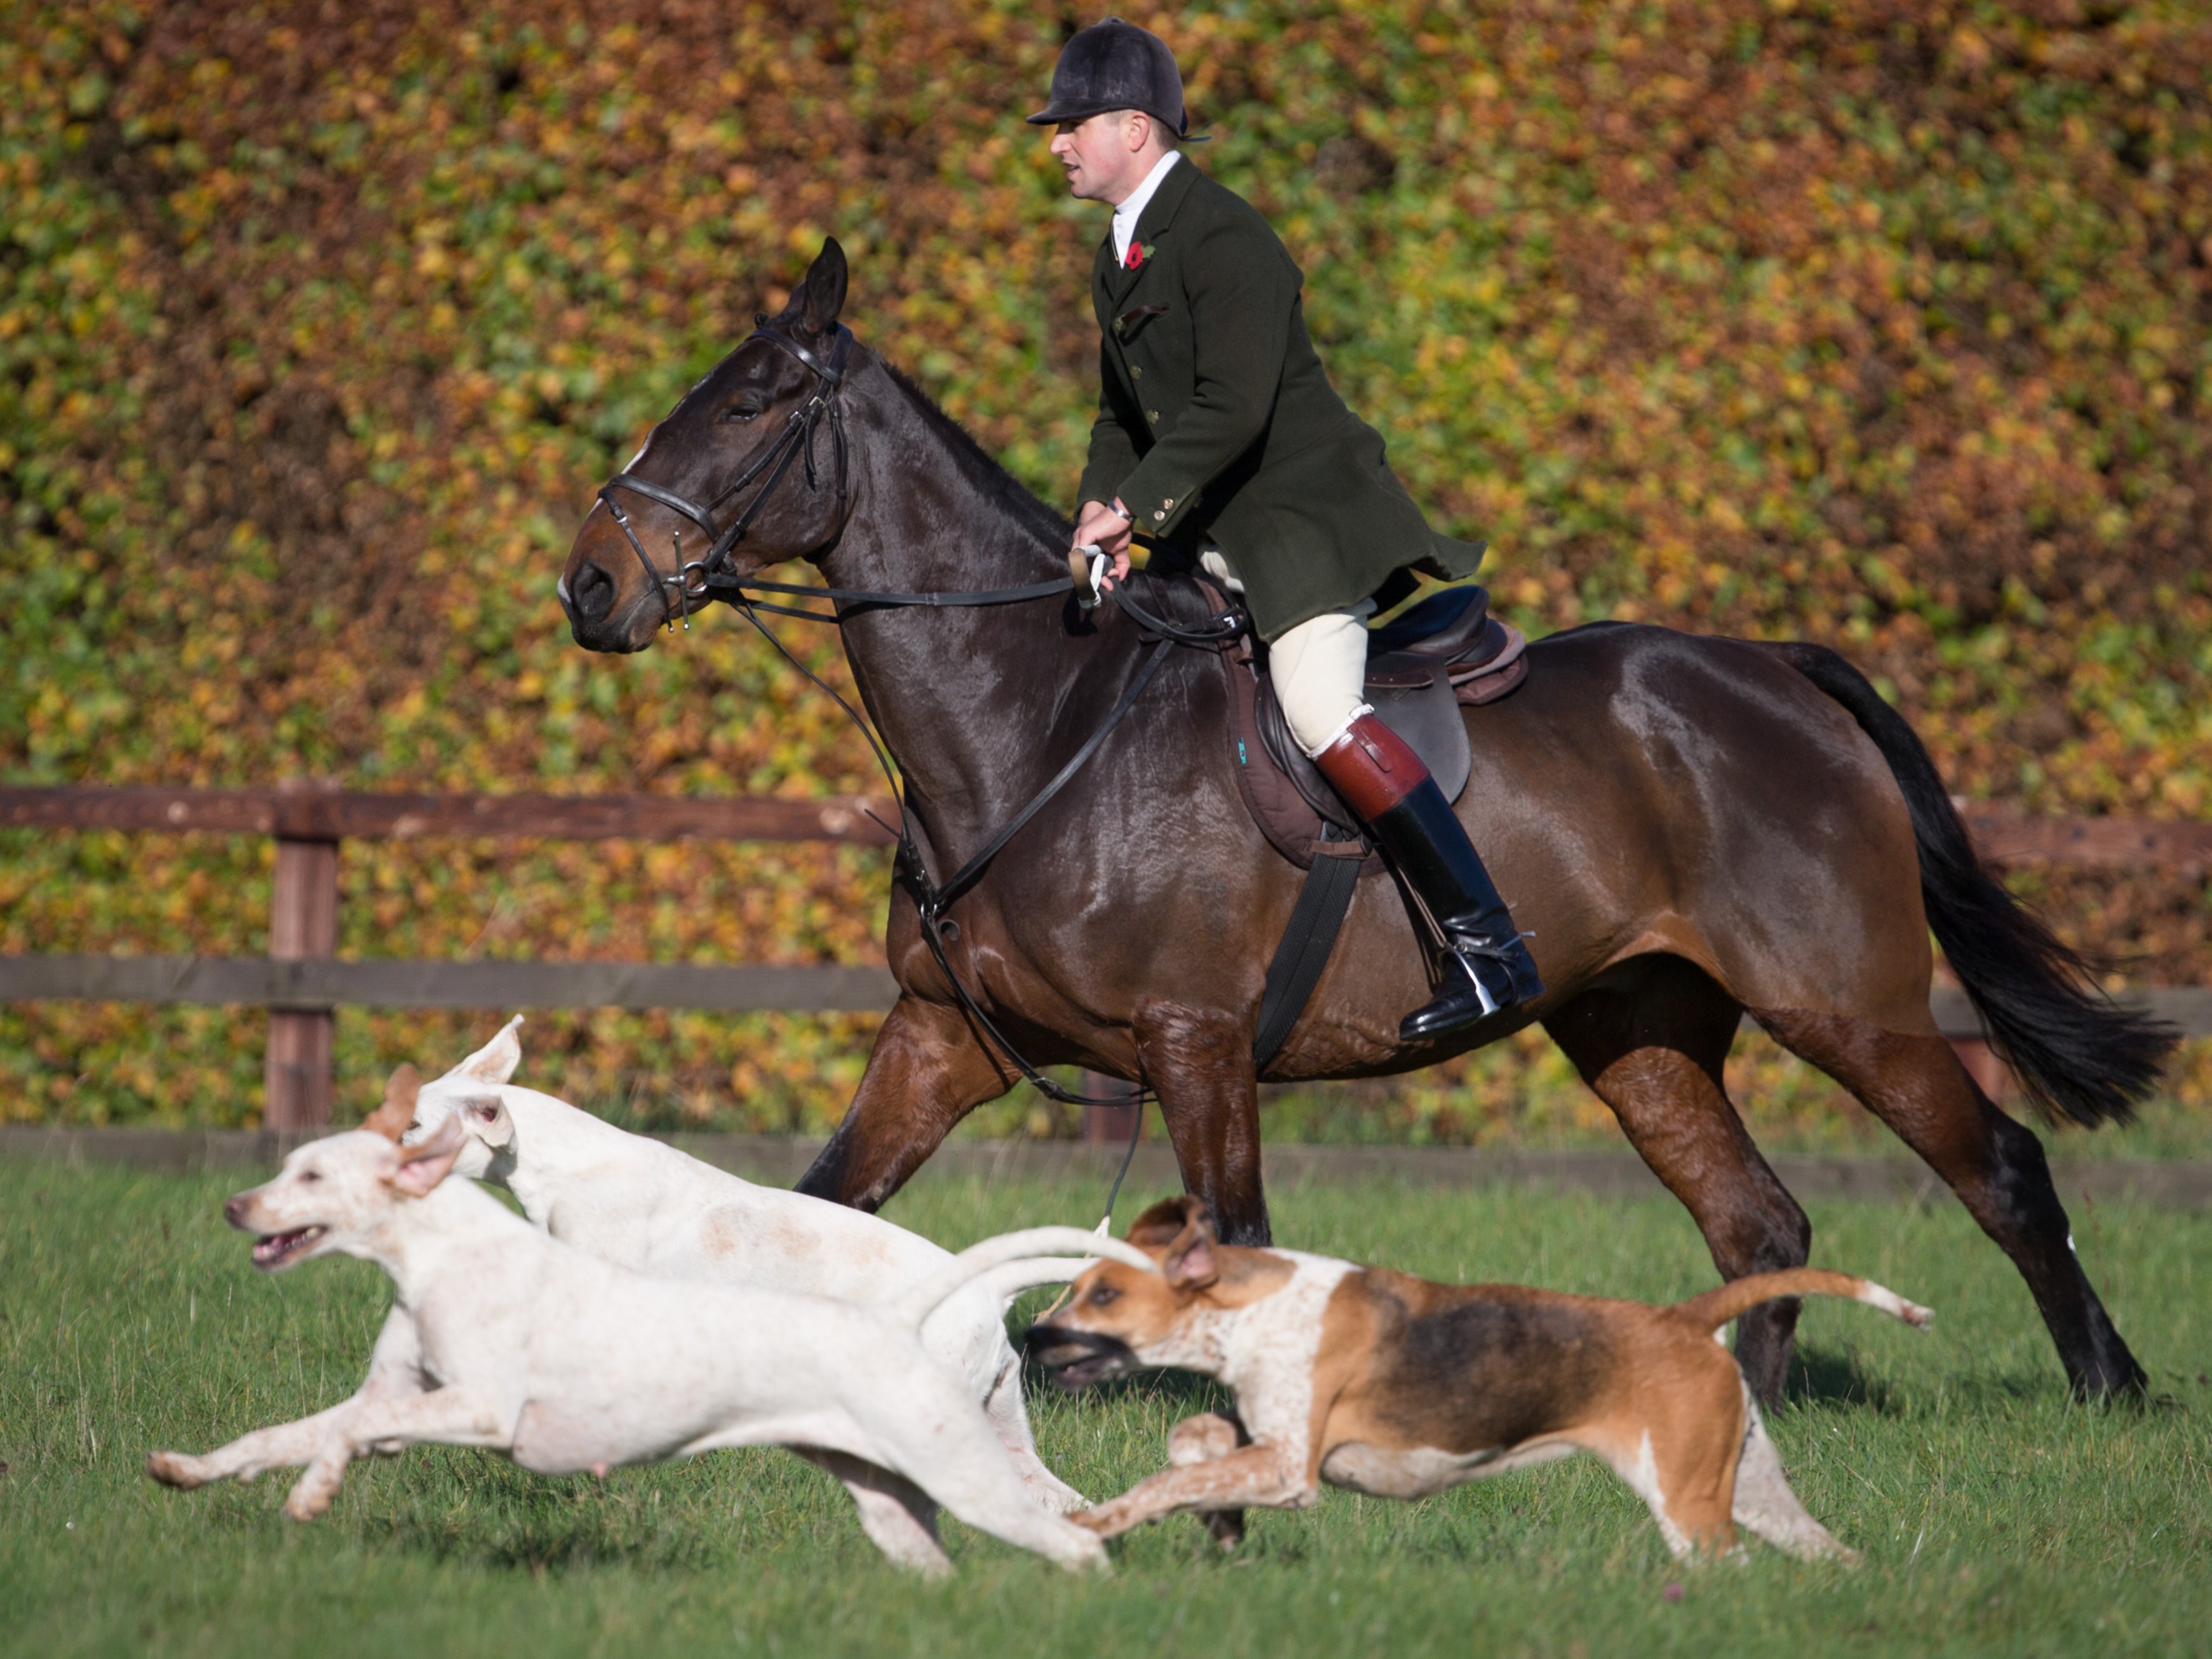 ‘Trail-hunting’ is a cover for foxhunting, according to opponents